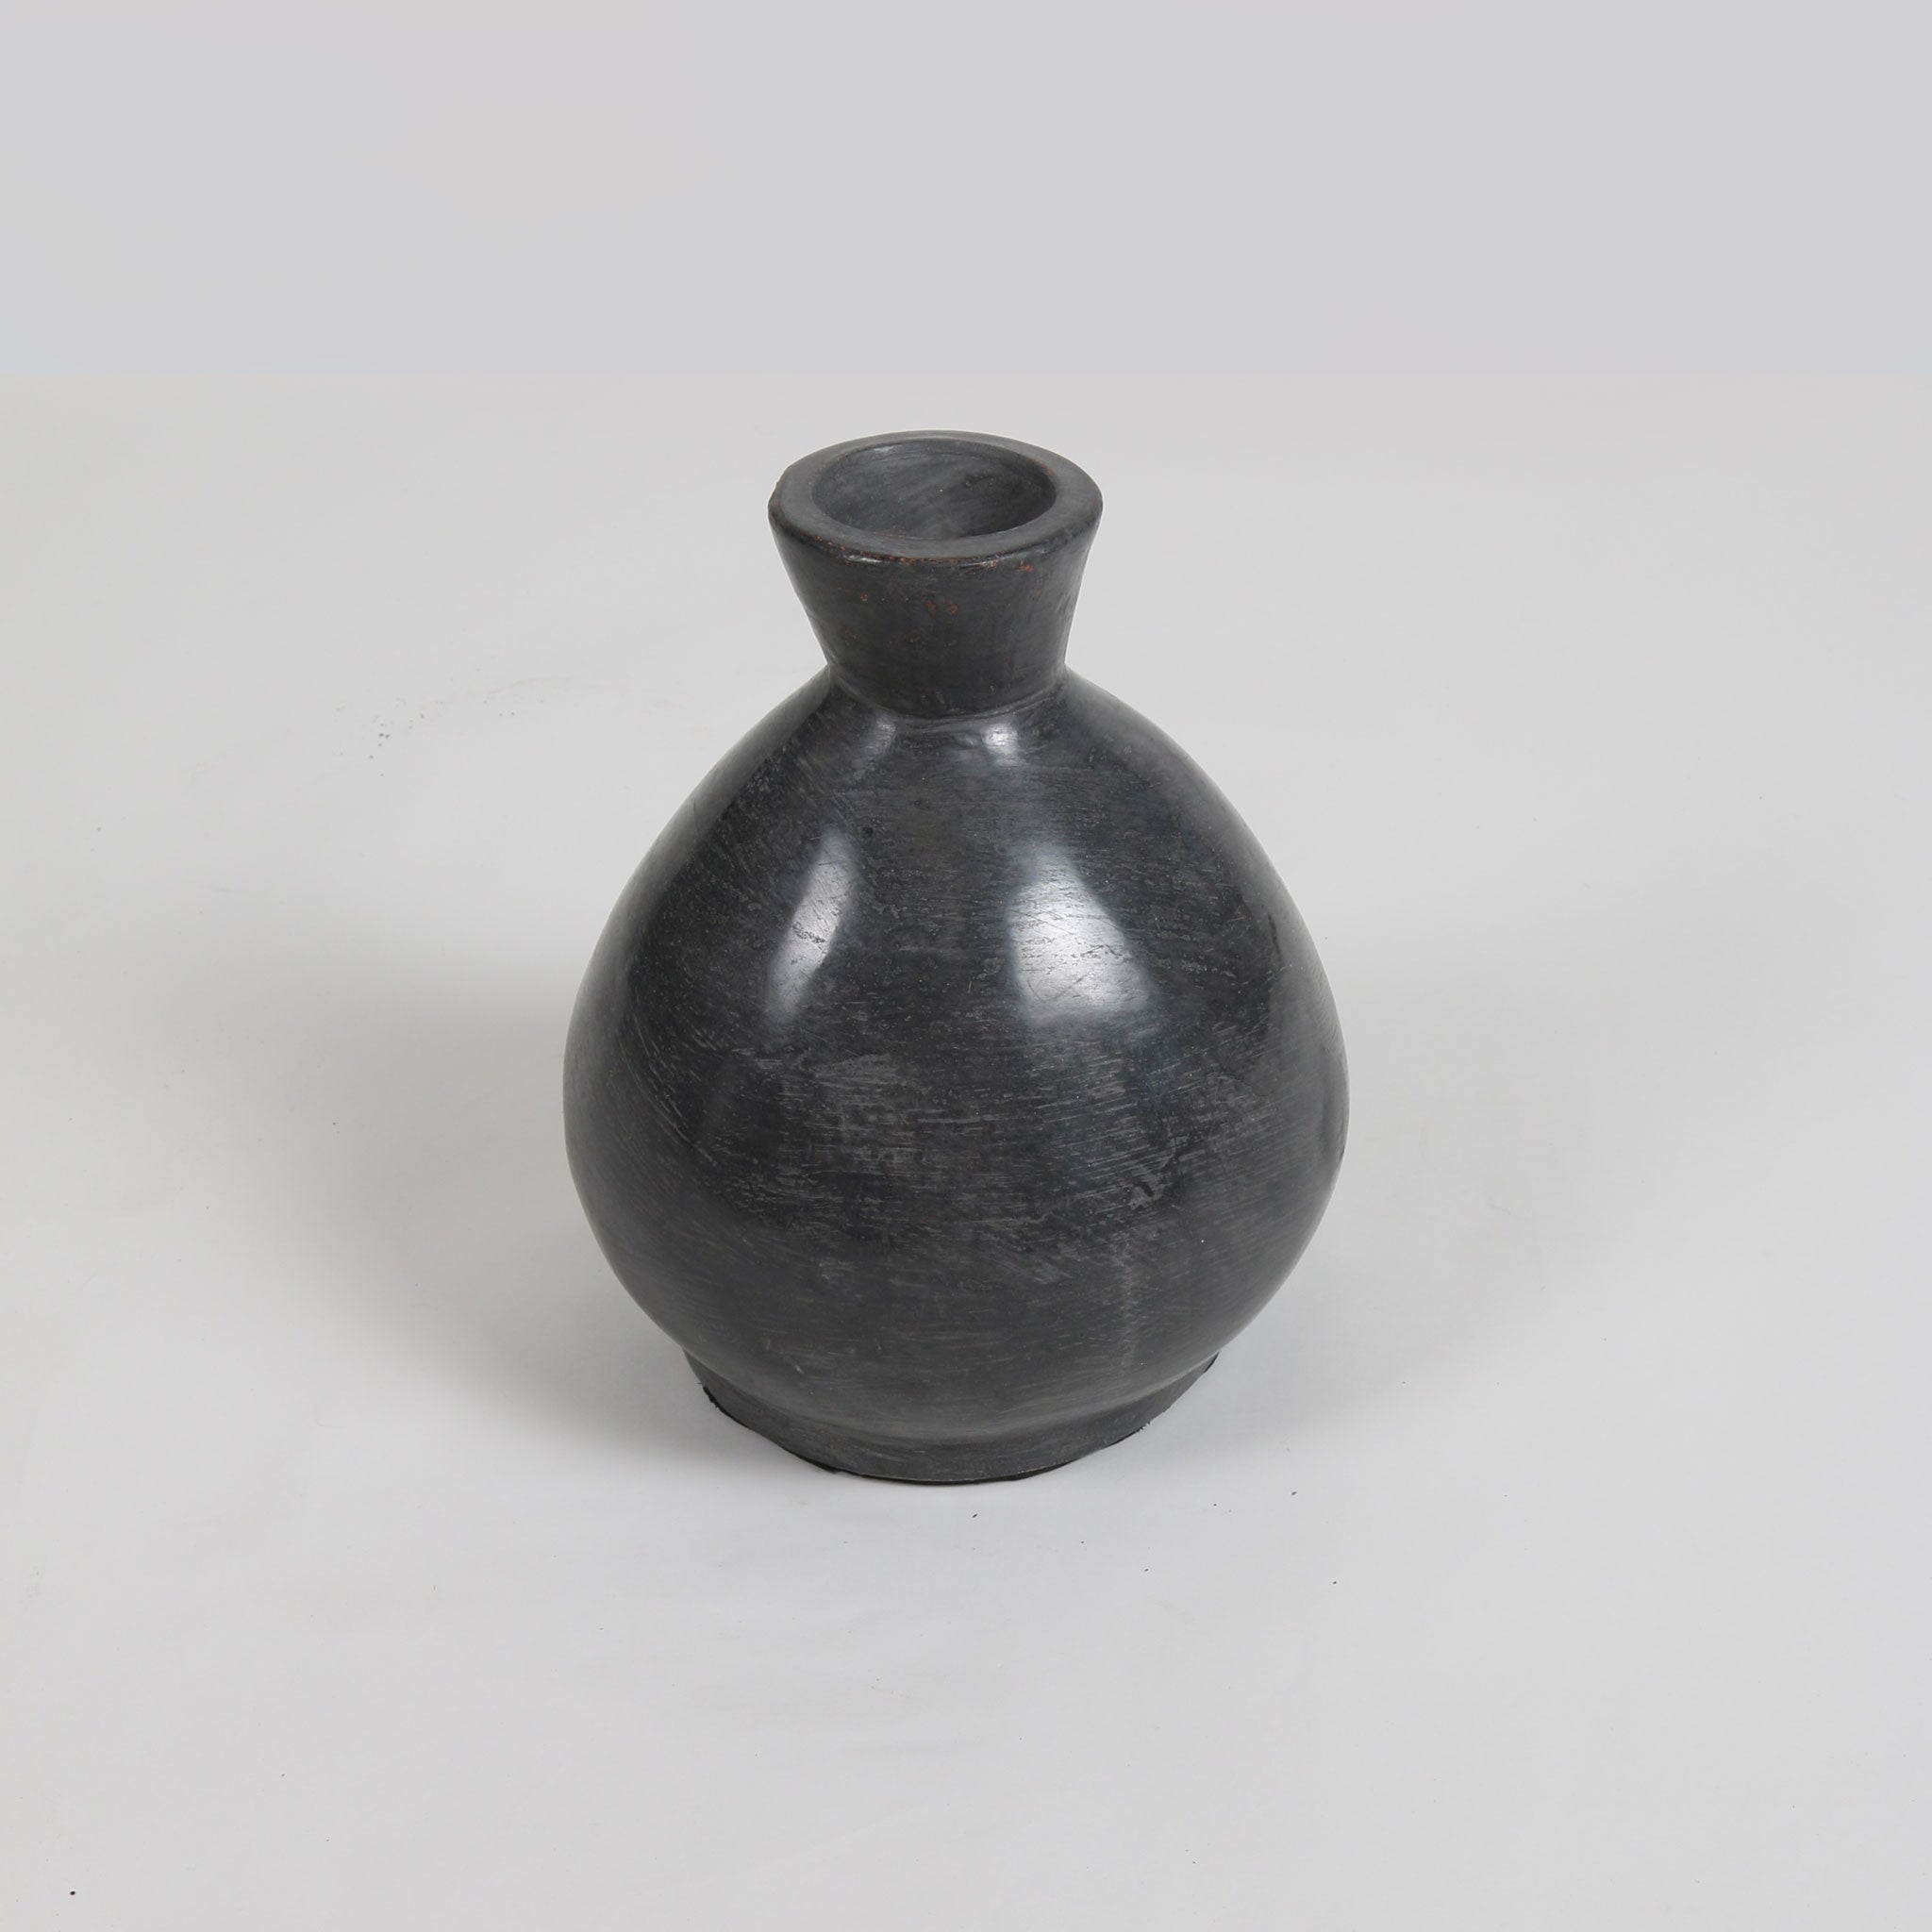 Distressed Black and Grey Pottery Vase